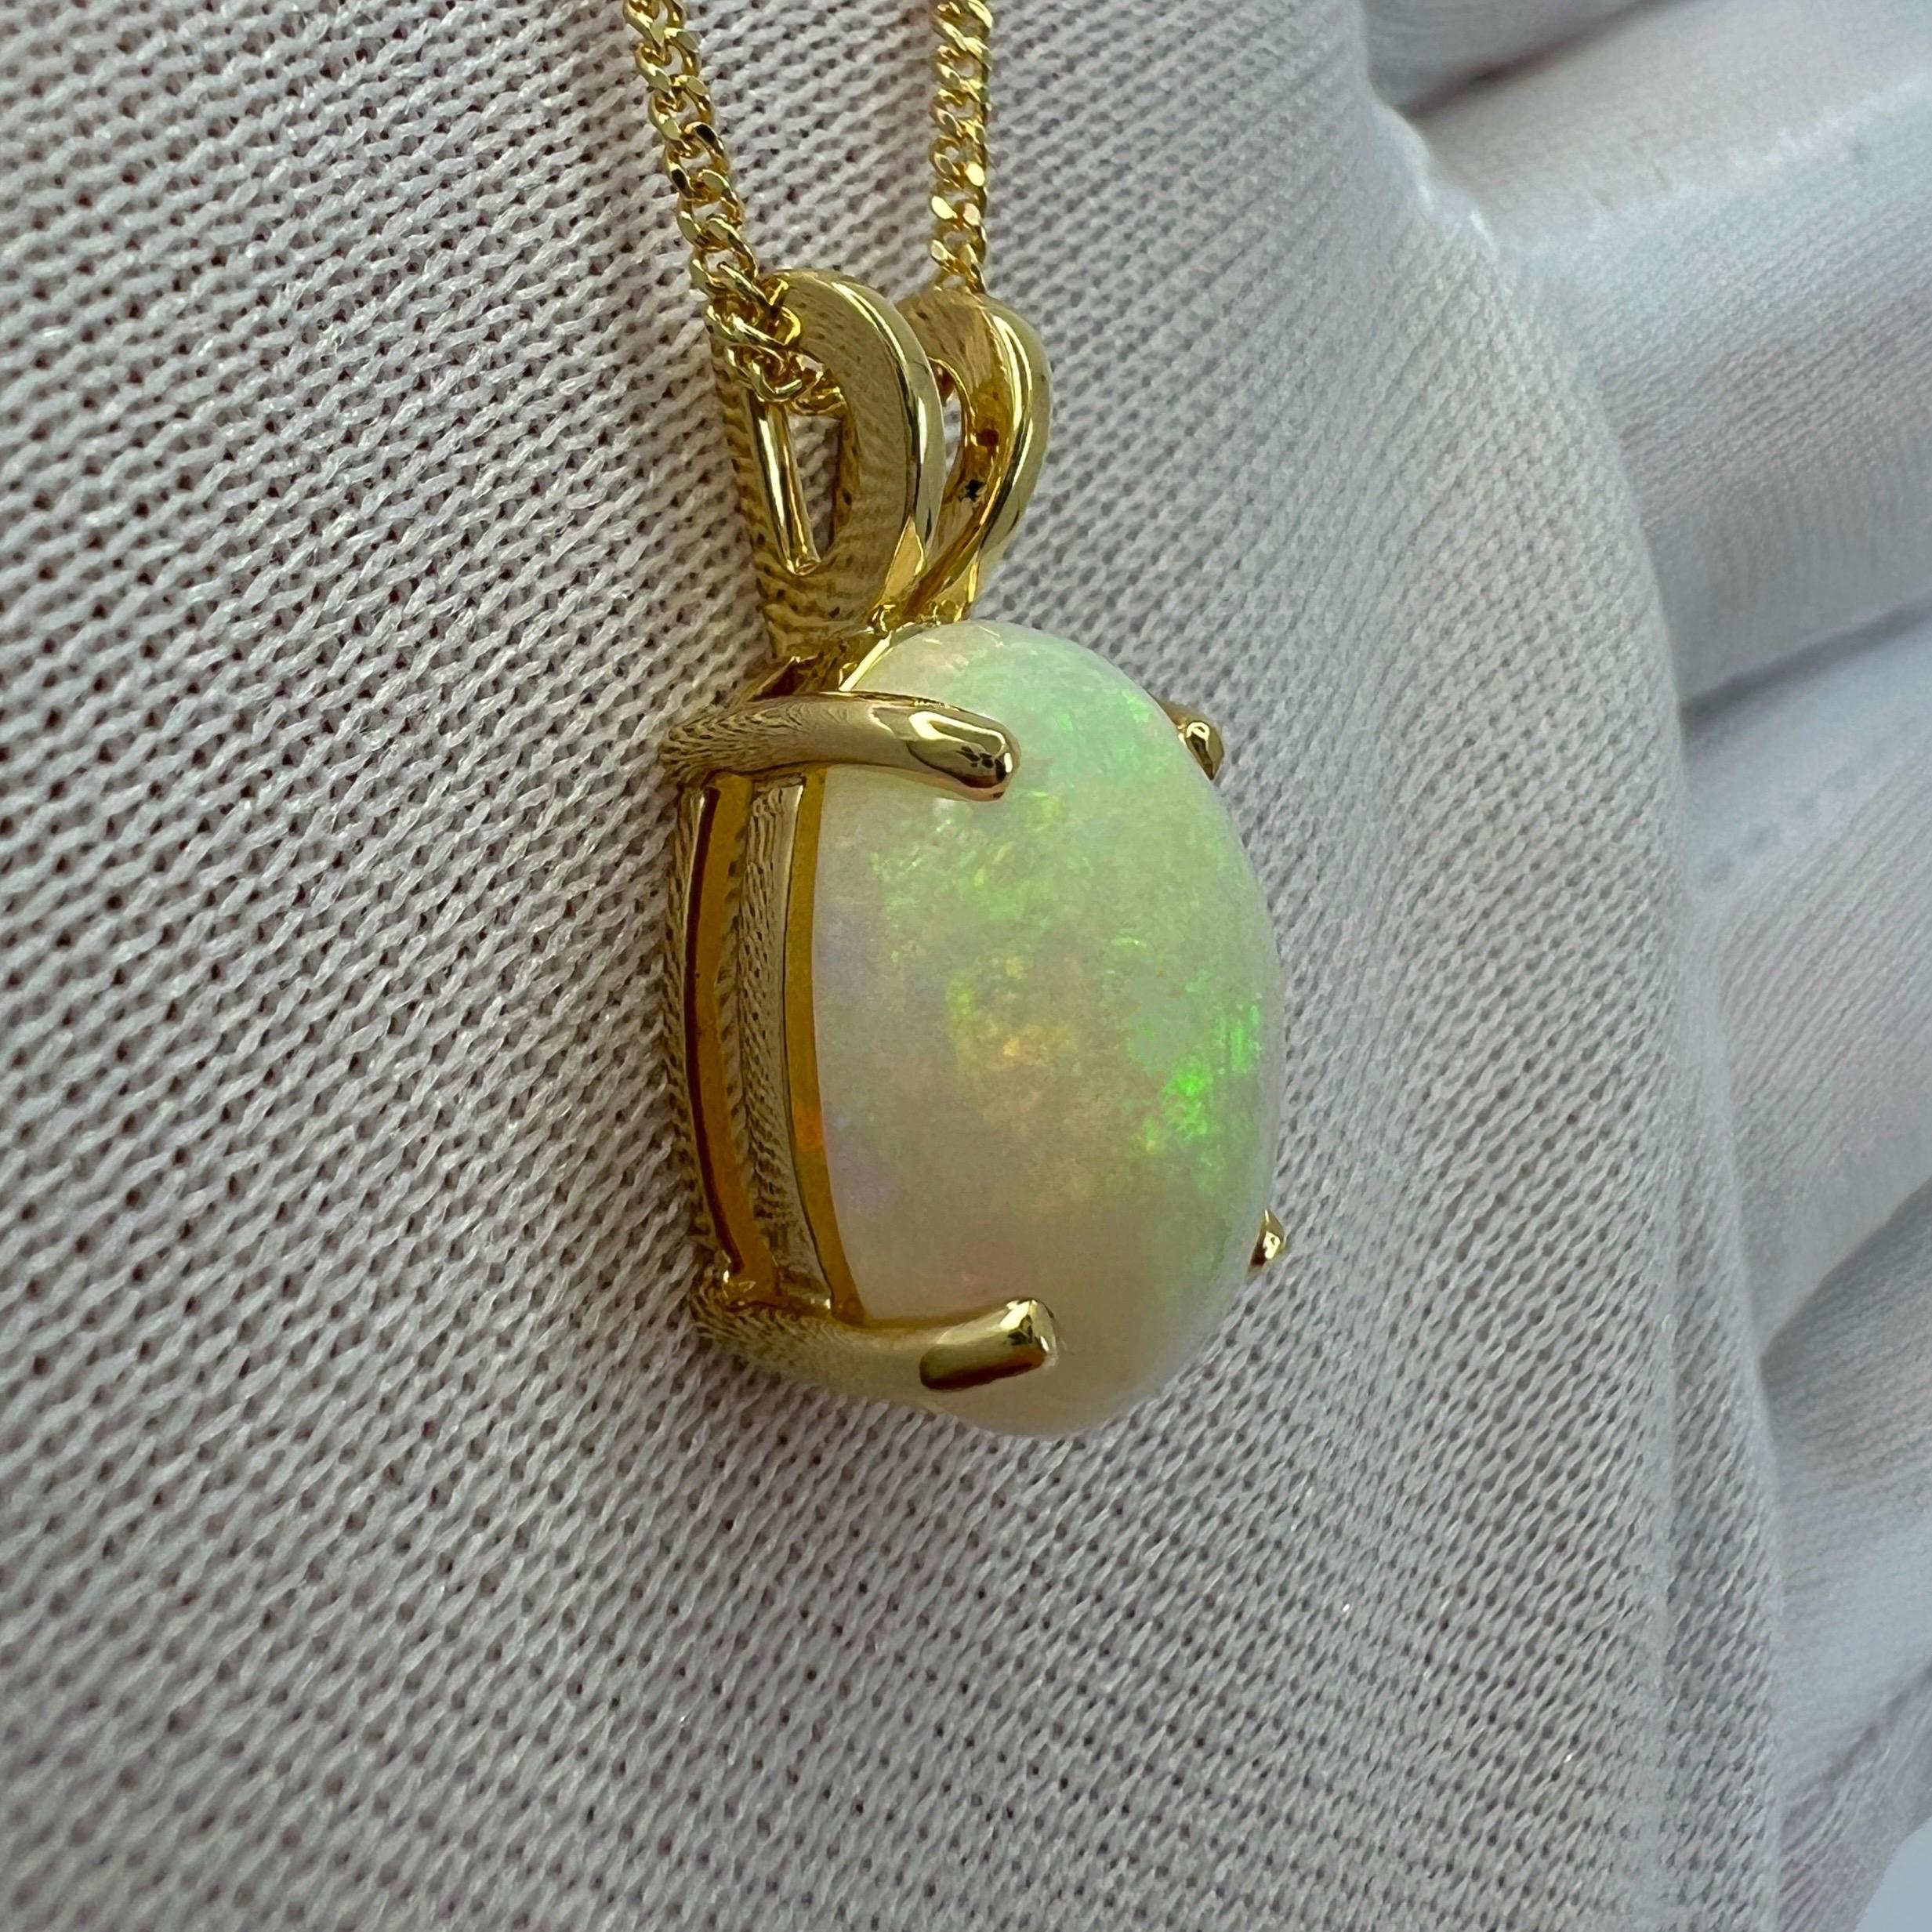 3ct Fine Australian White Opal Oval Cabochon 18k Yellow Gold Pendant Necklace For Sale 5